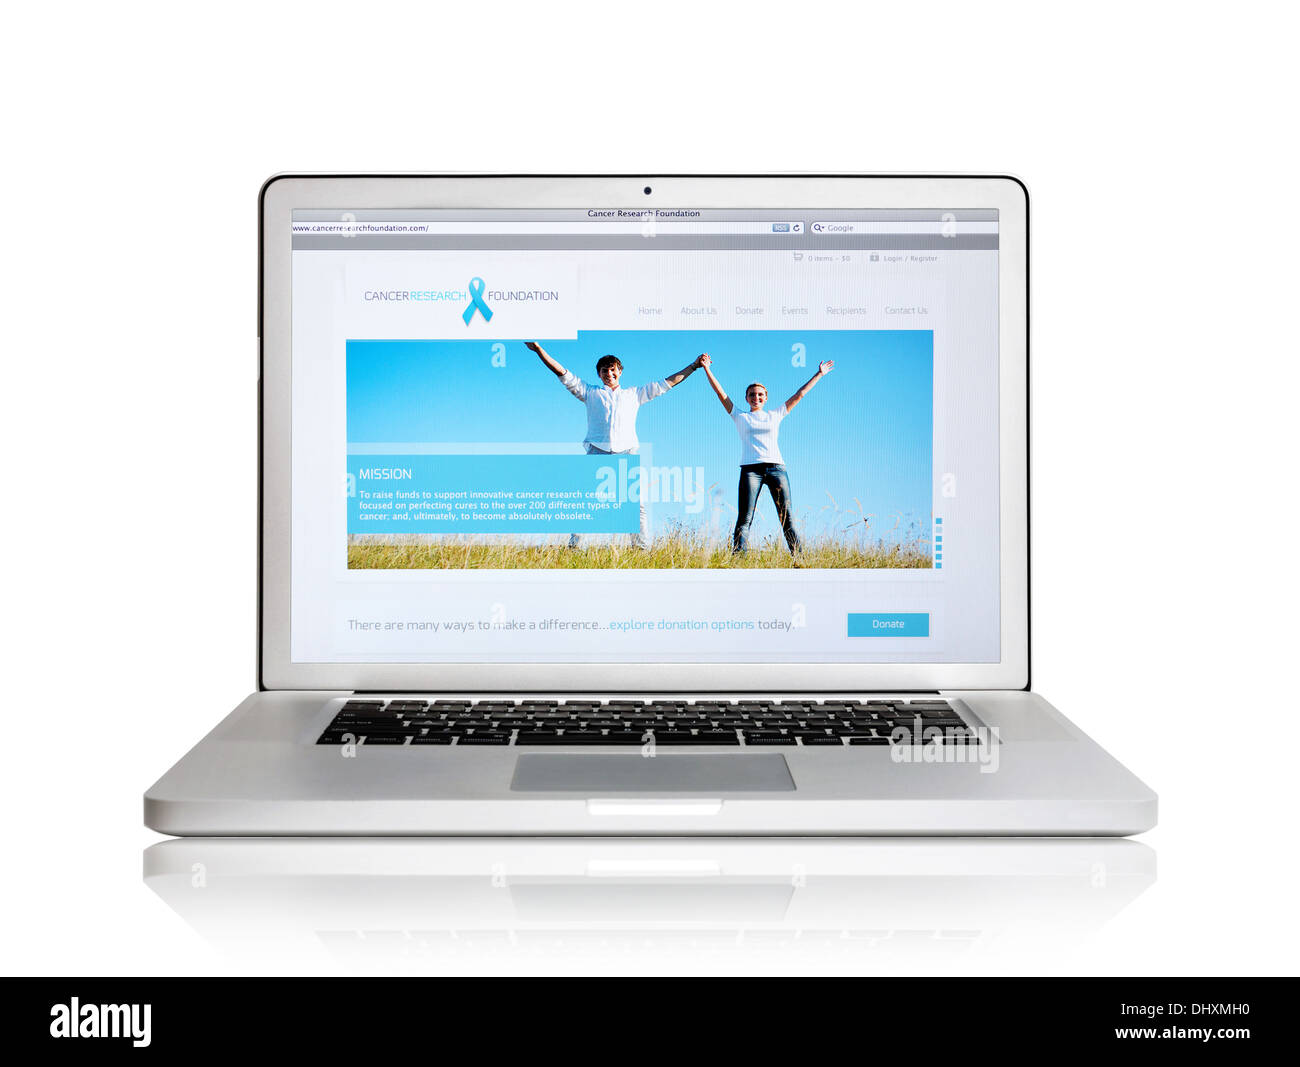 Cancer Research Foundation website on laptop screen Stock Photo